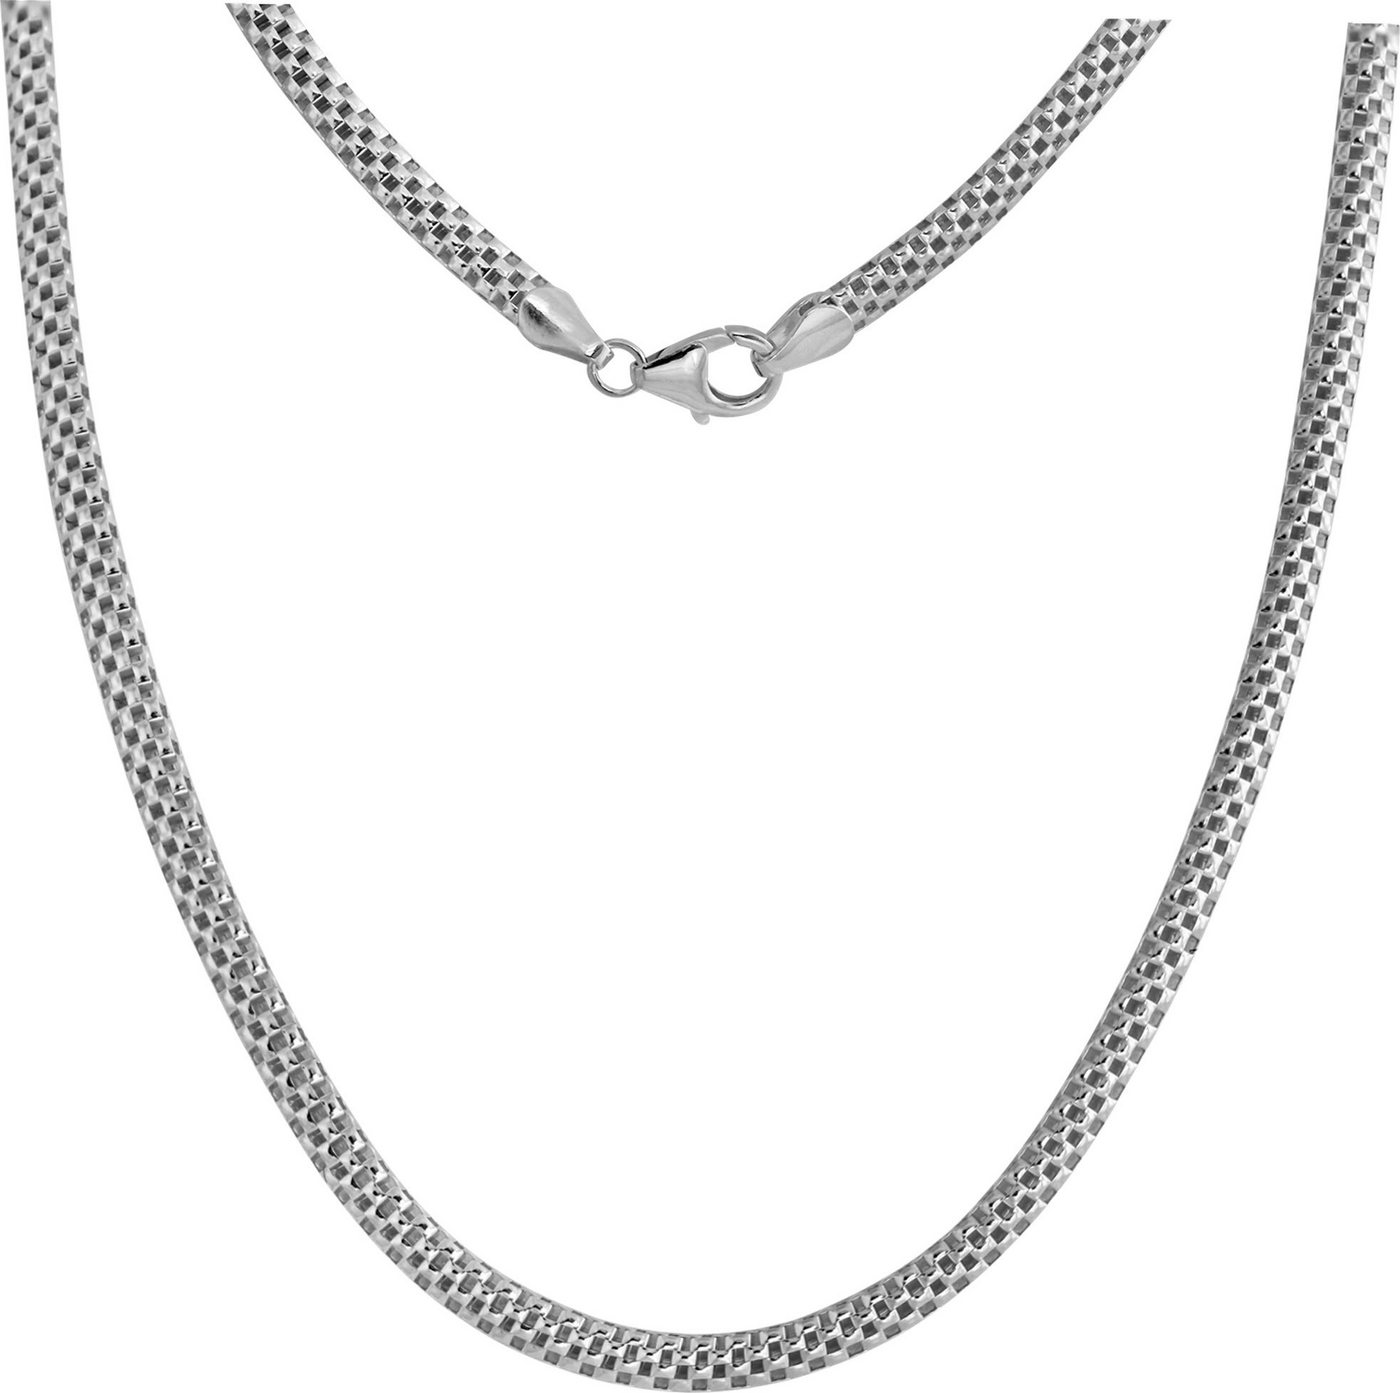 SilberDream Collier SilberDream Collier silber Damen Echt, Colliers ca. 45cm, 925 Sterling Silber, Farbe: silber, Made-In Germany von SilberDream